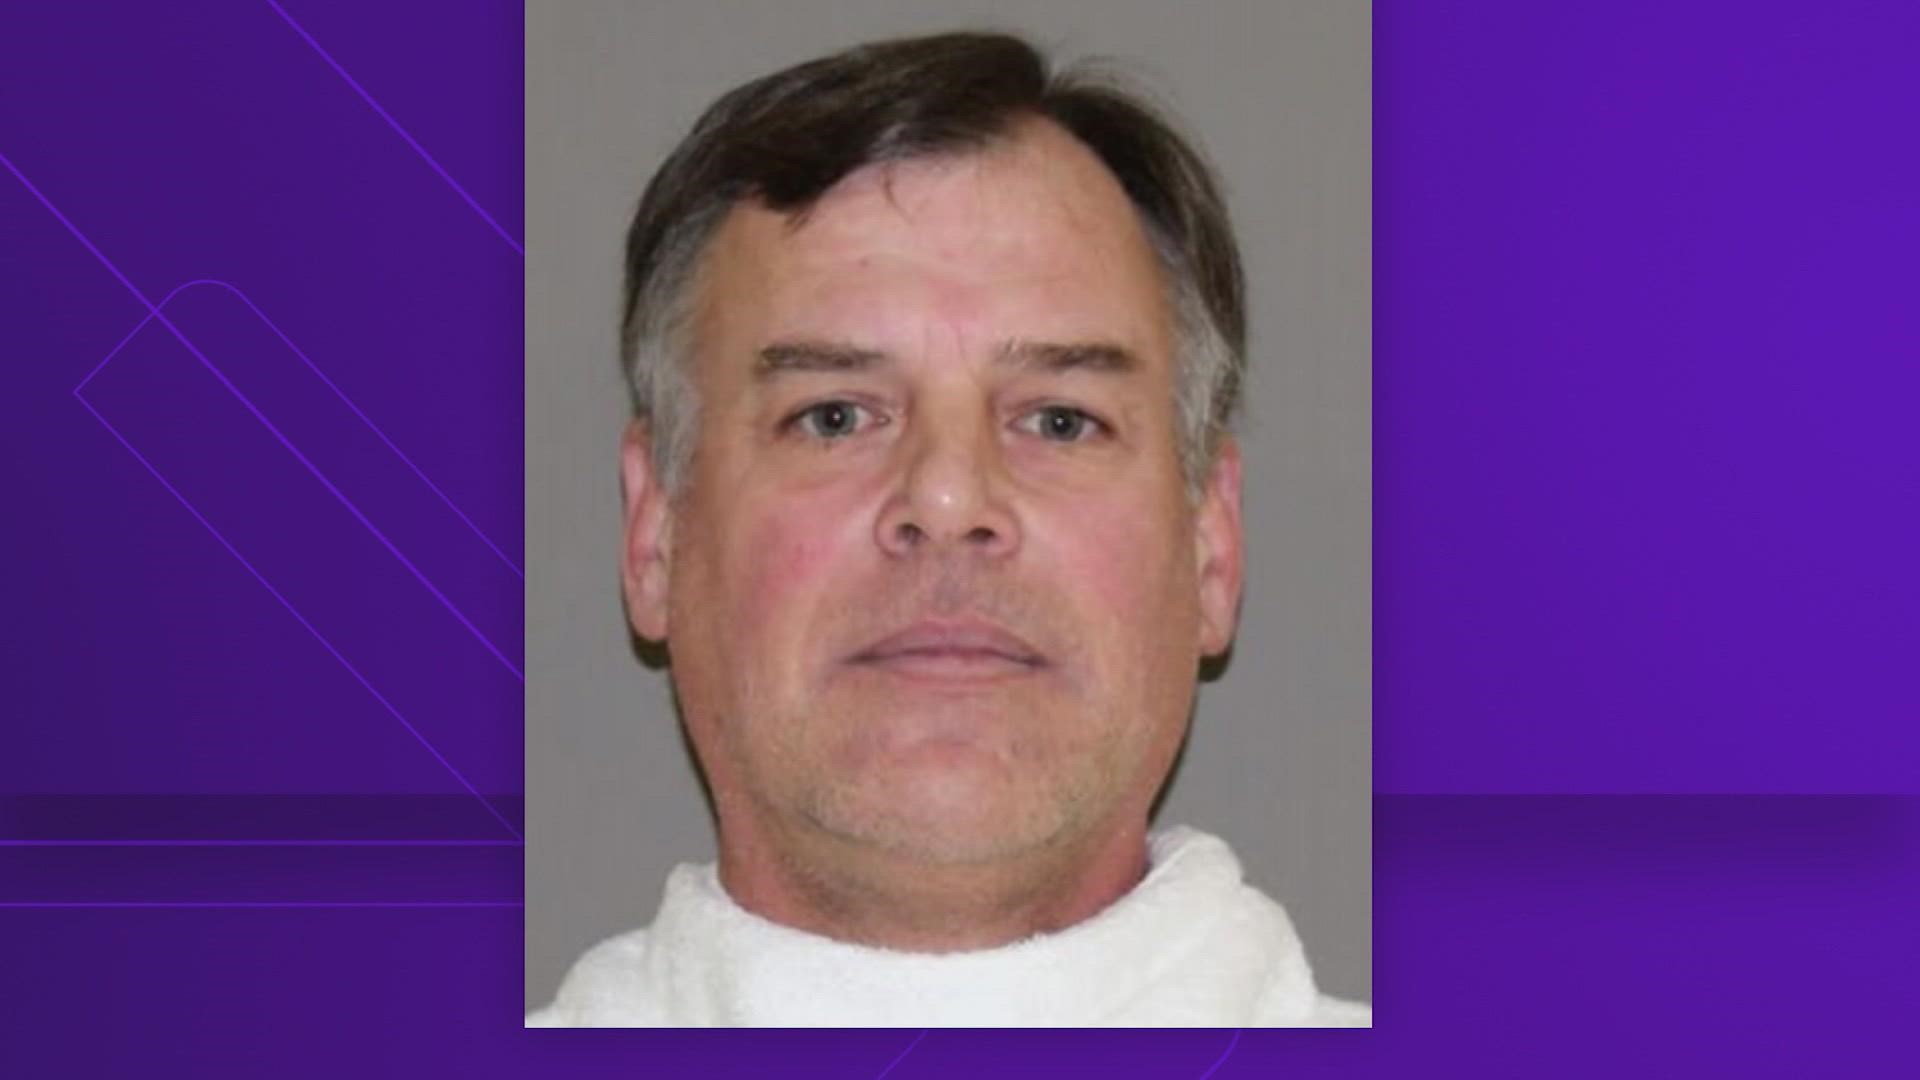 In January 2019, Wetteland was arrested on charges of charge of continuous sexual abuse of a child under the age of 14 in Denton County, according to court records.